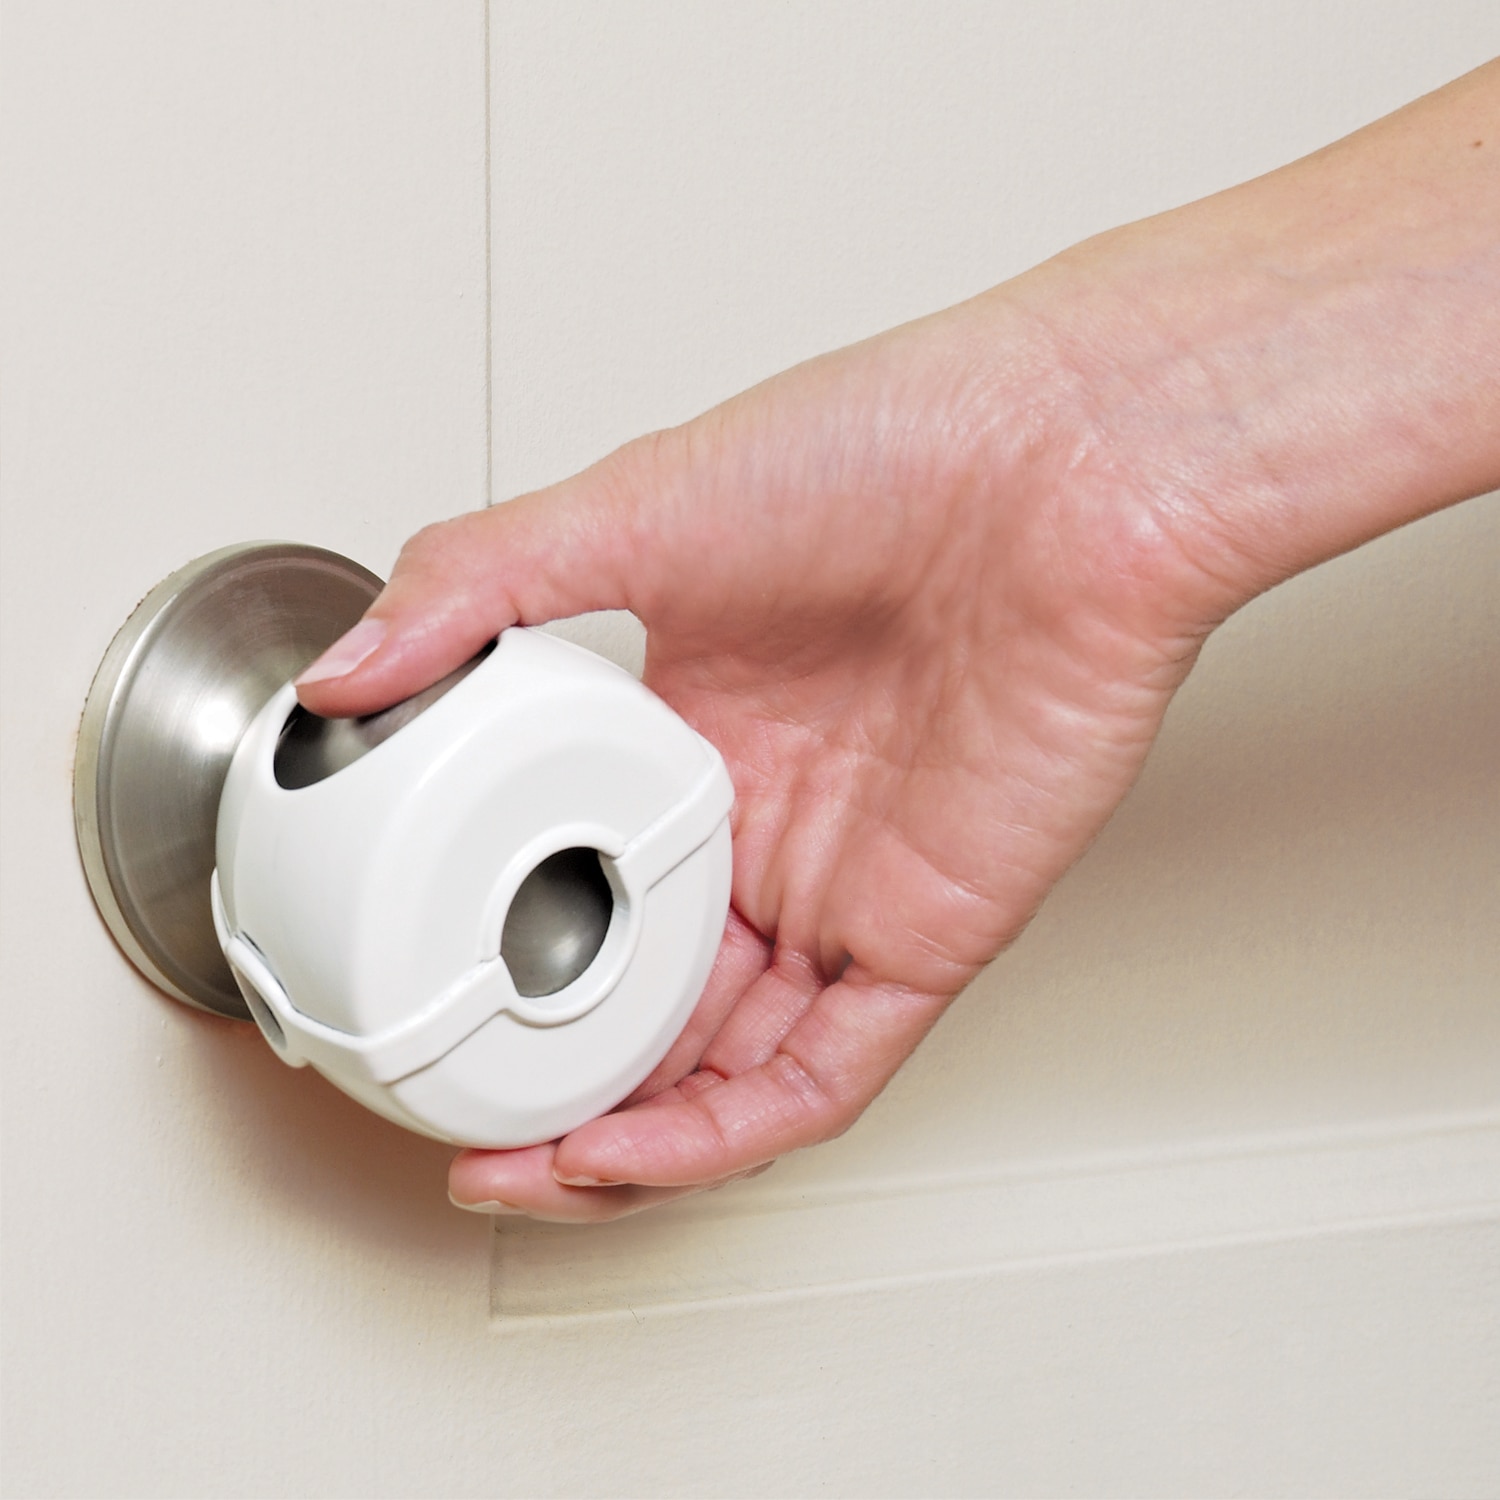 safety knobs for doors photo - 7